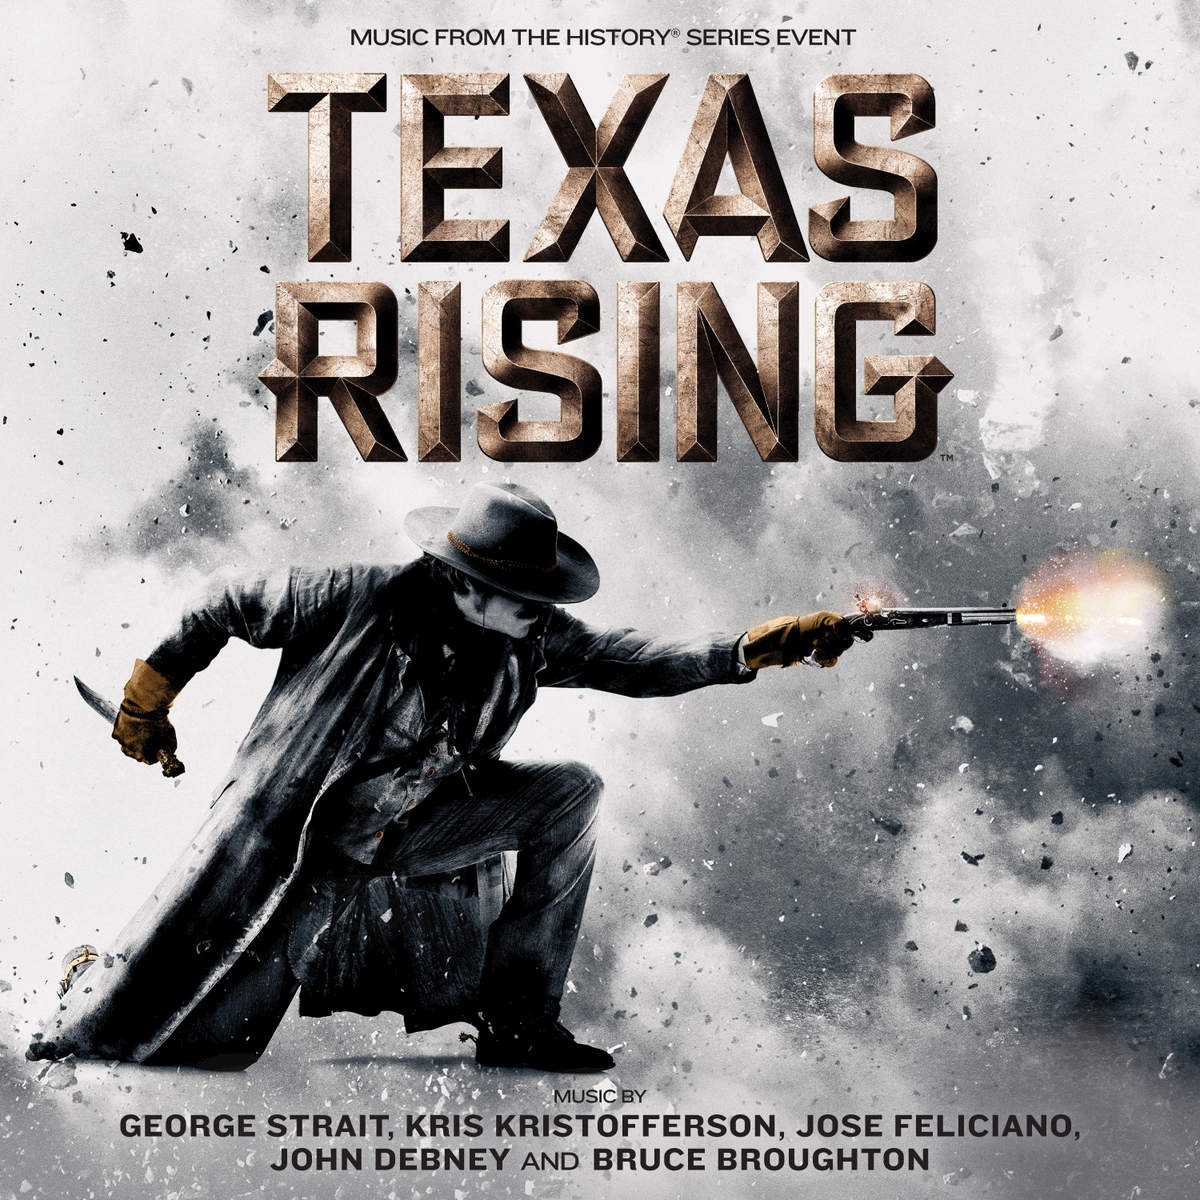 Bigfoot And Hayes At The Waterfall  From " Texas Rising" Mini Series Soundtrack